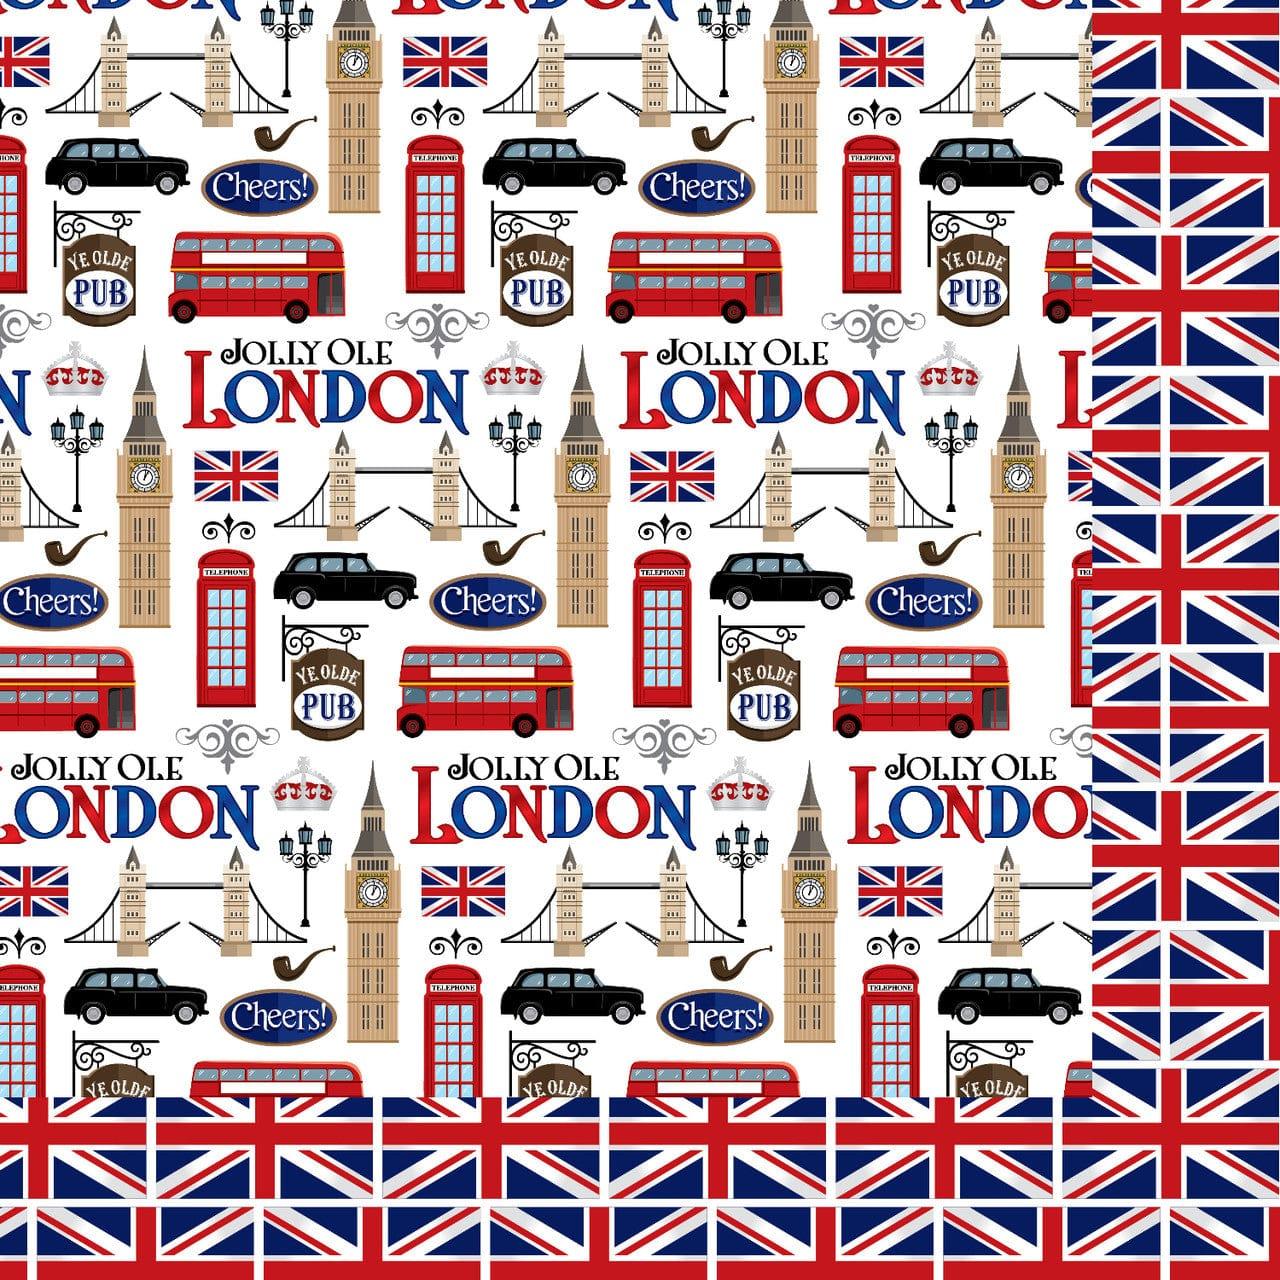 MNineDesign's Jolly Ole London Collection London Icons 12 x 12 Double-Sided Scrapbook Paper by SSC Designs - Scrapbook Supply Companies